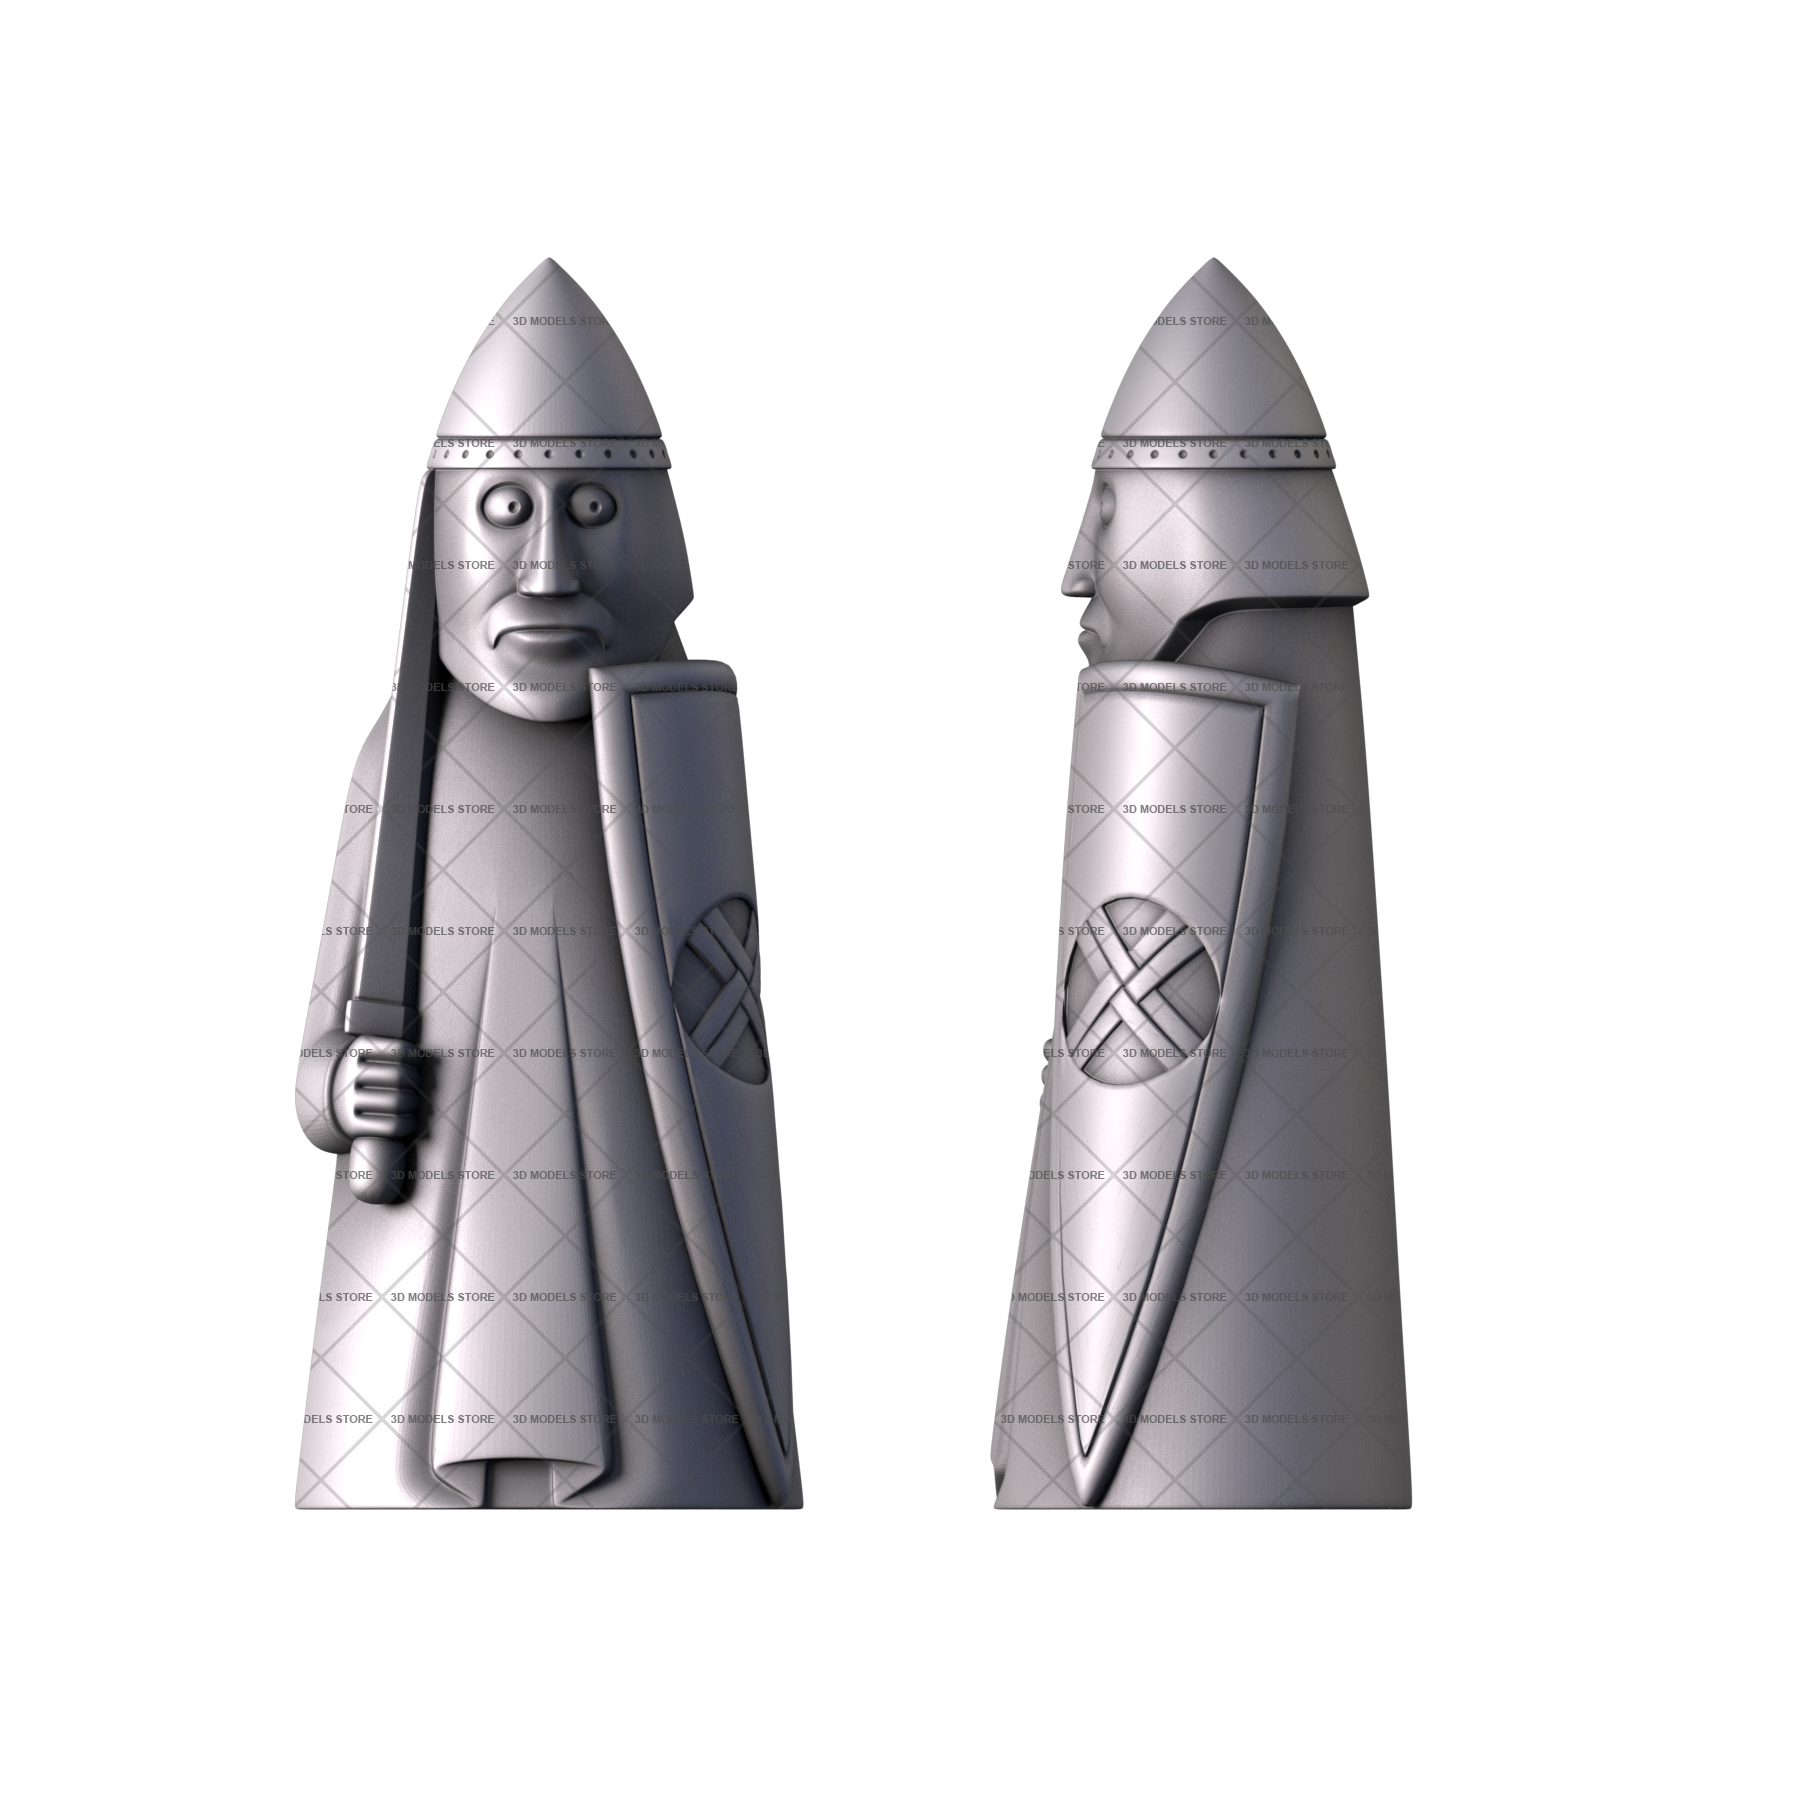 Rook - Isle of Lewis Chess, 3d models (stl)